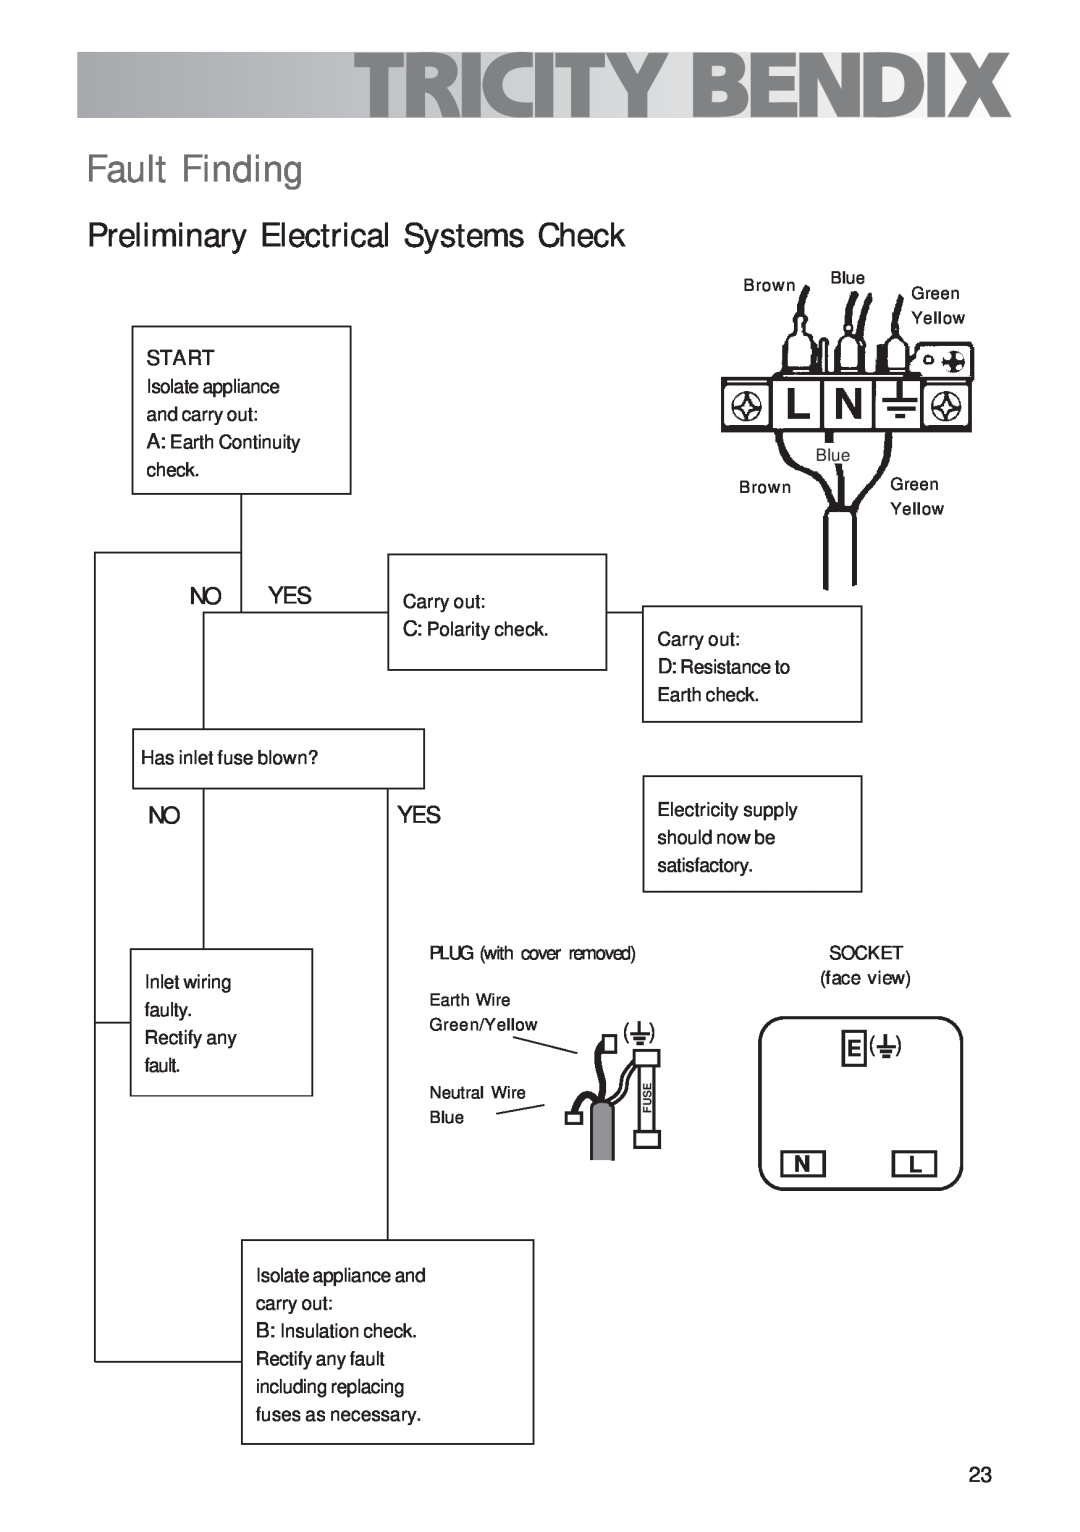 Tricity Bendix TBG700 Fault Finding, Preliminary Electrical Systems Check, Start, A Earth Continuity check, Earth Wire 